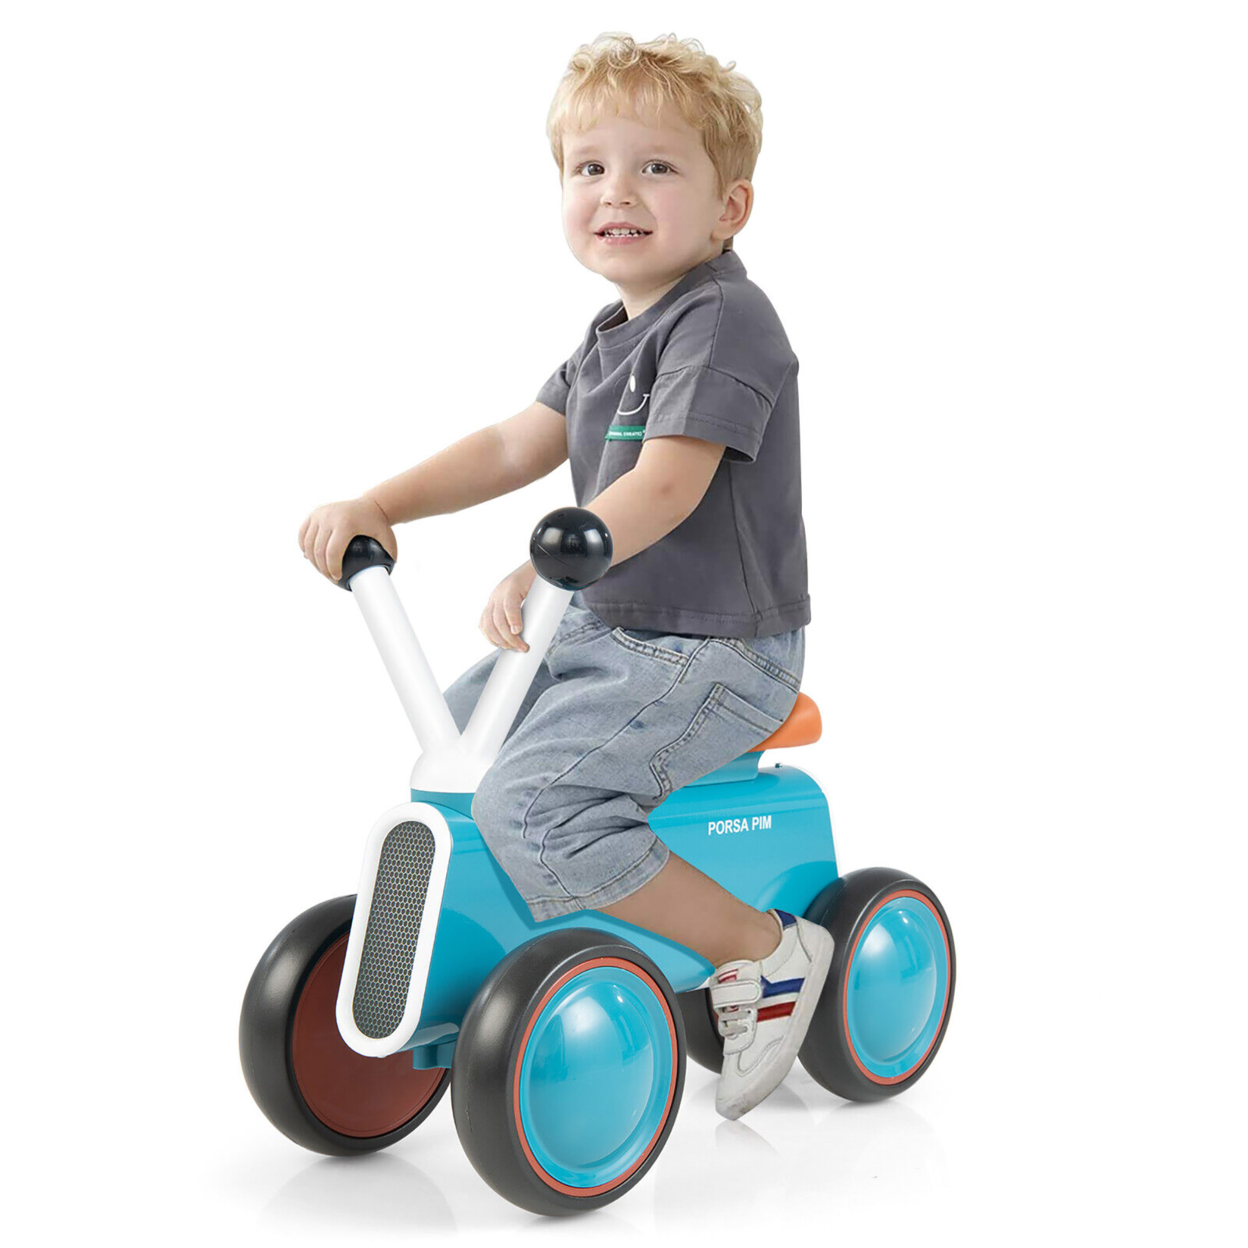 Baby Balance Bike For 10-24 Months Riding Toy No Pedal For Boys & Girls Blue